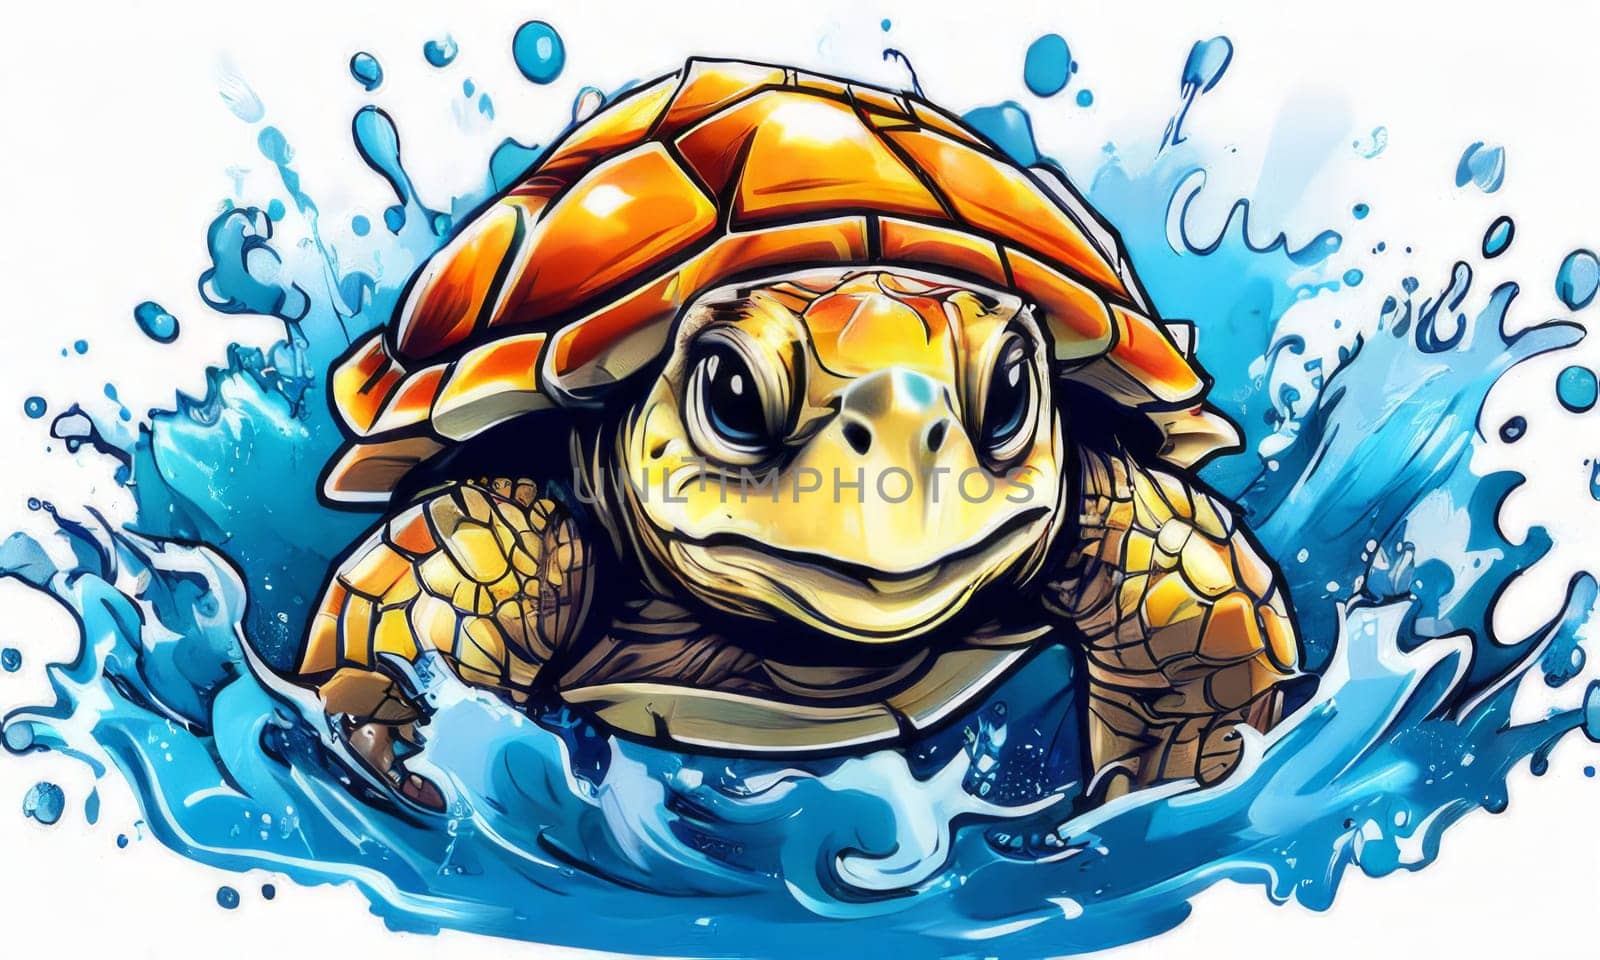 Turtle moves gracefully through water, its movements fluid, effortless. For fashion, clothing design, animal themed clothing advertising, as illustration for interesting clothing style, Tshirt design. by Angelsmoon